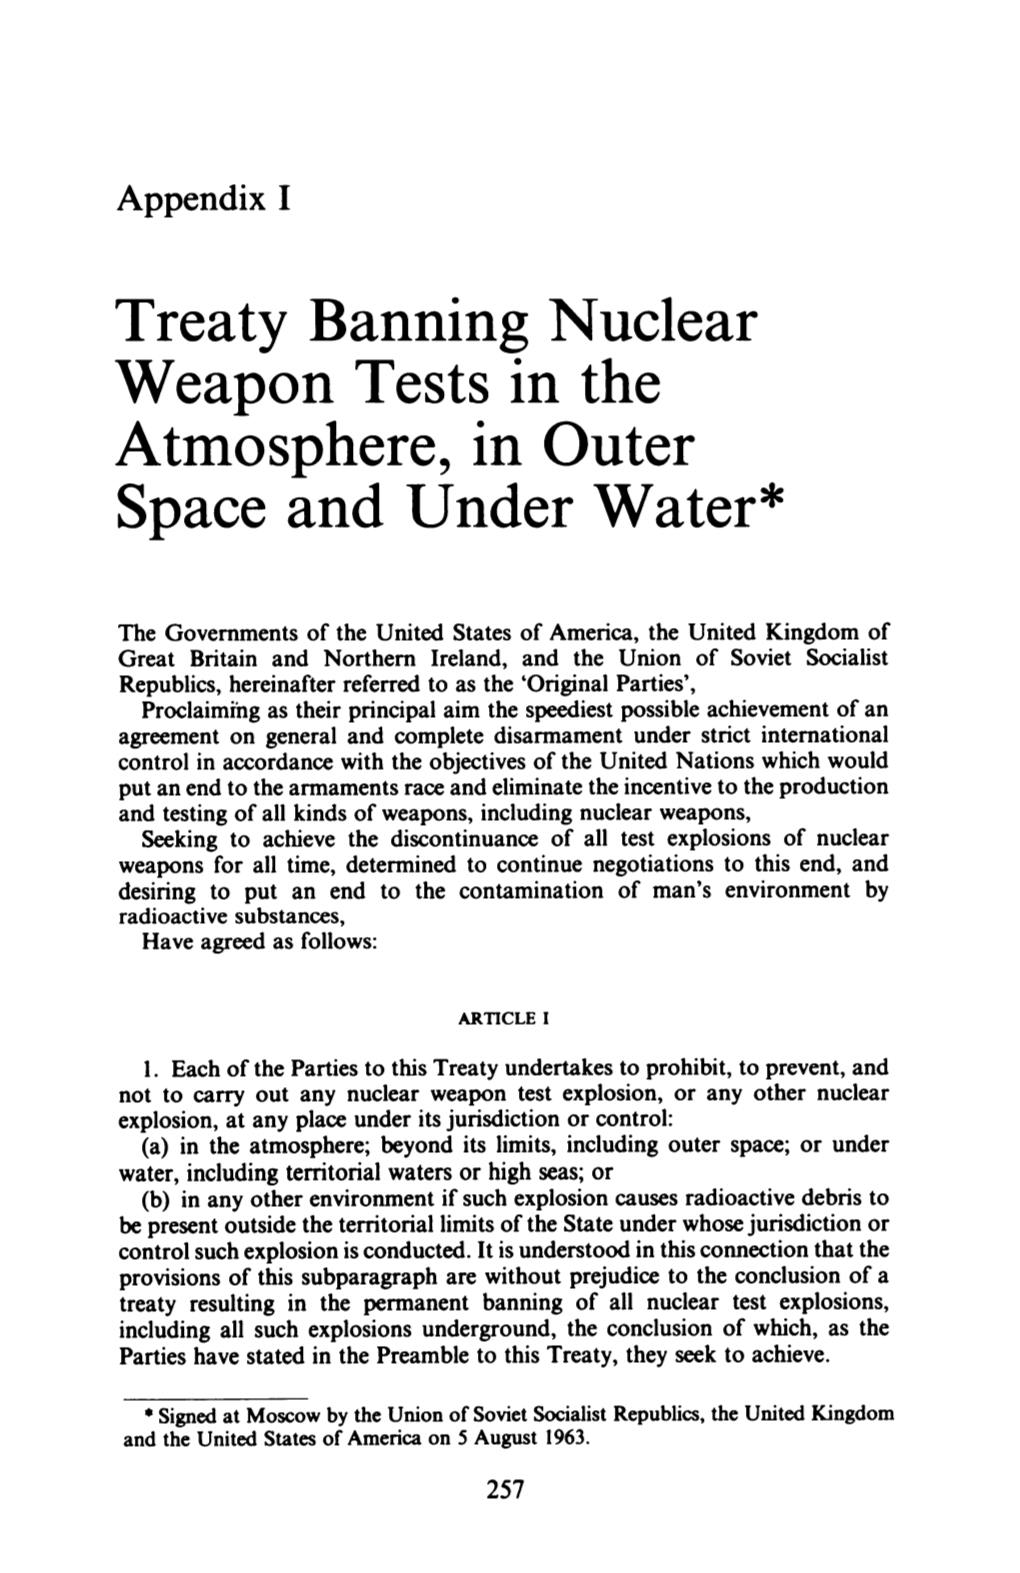 Treaty Banning Nuclear Weapon Tests in the Atmosphere, in Outer Space and Under Water*